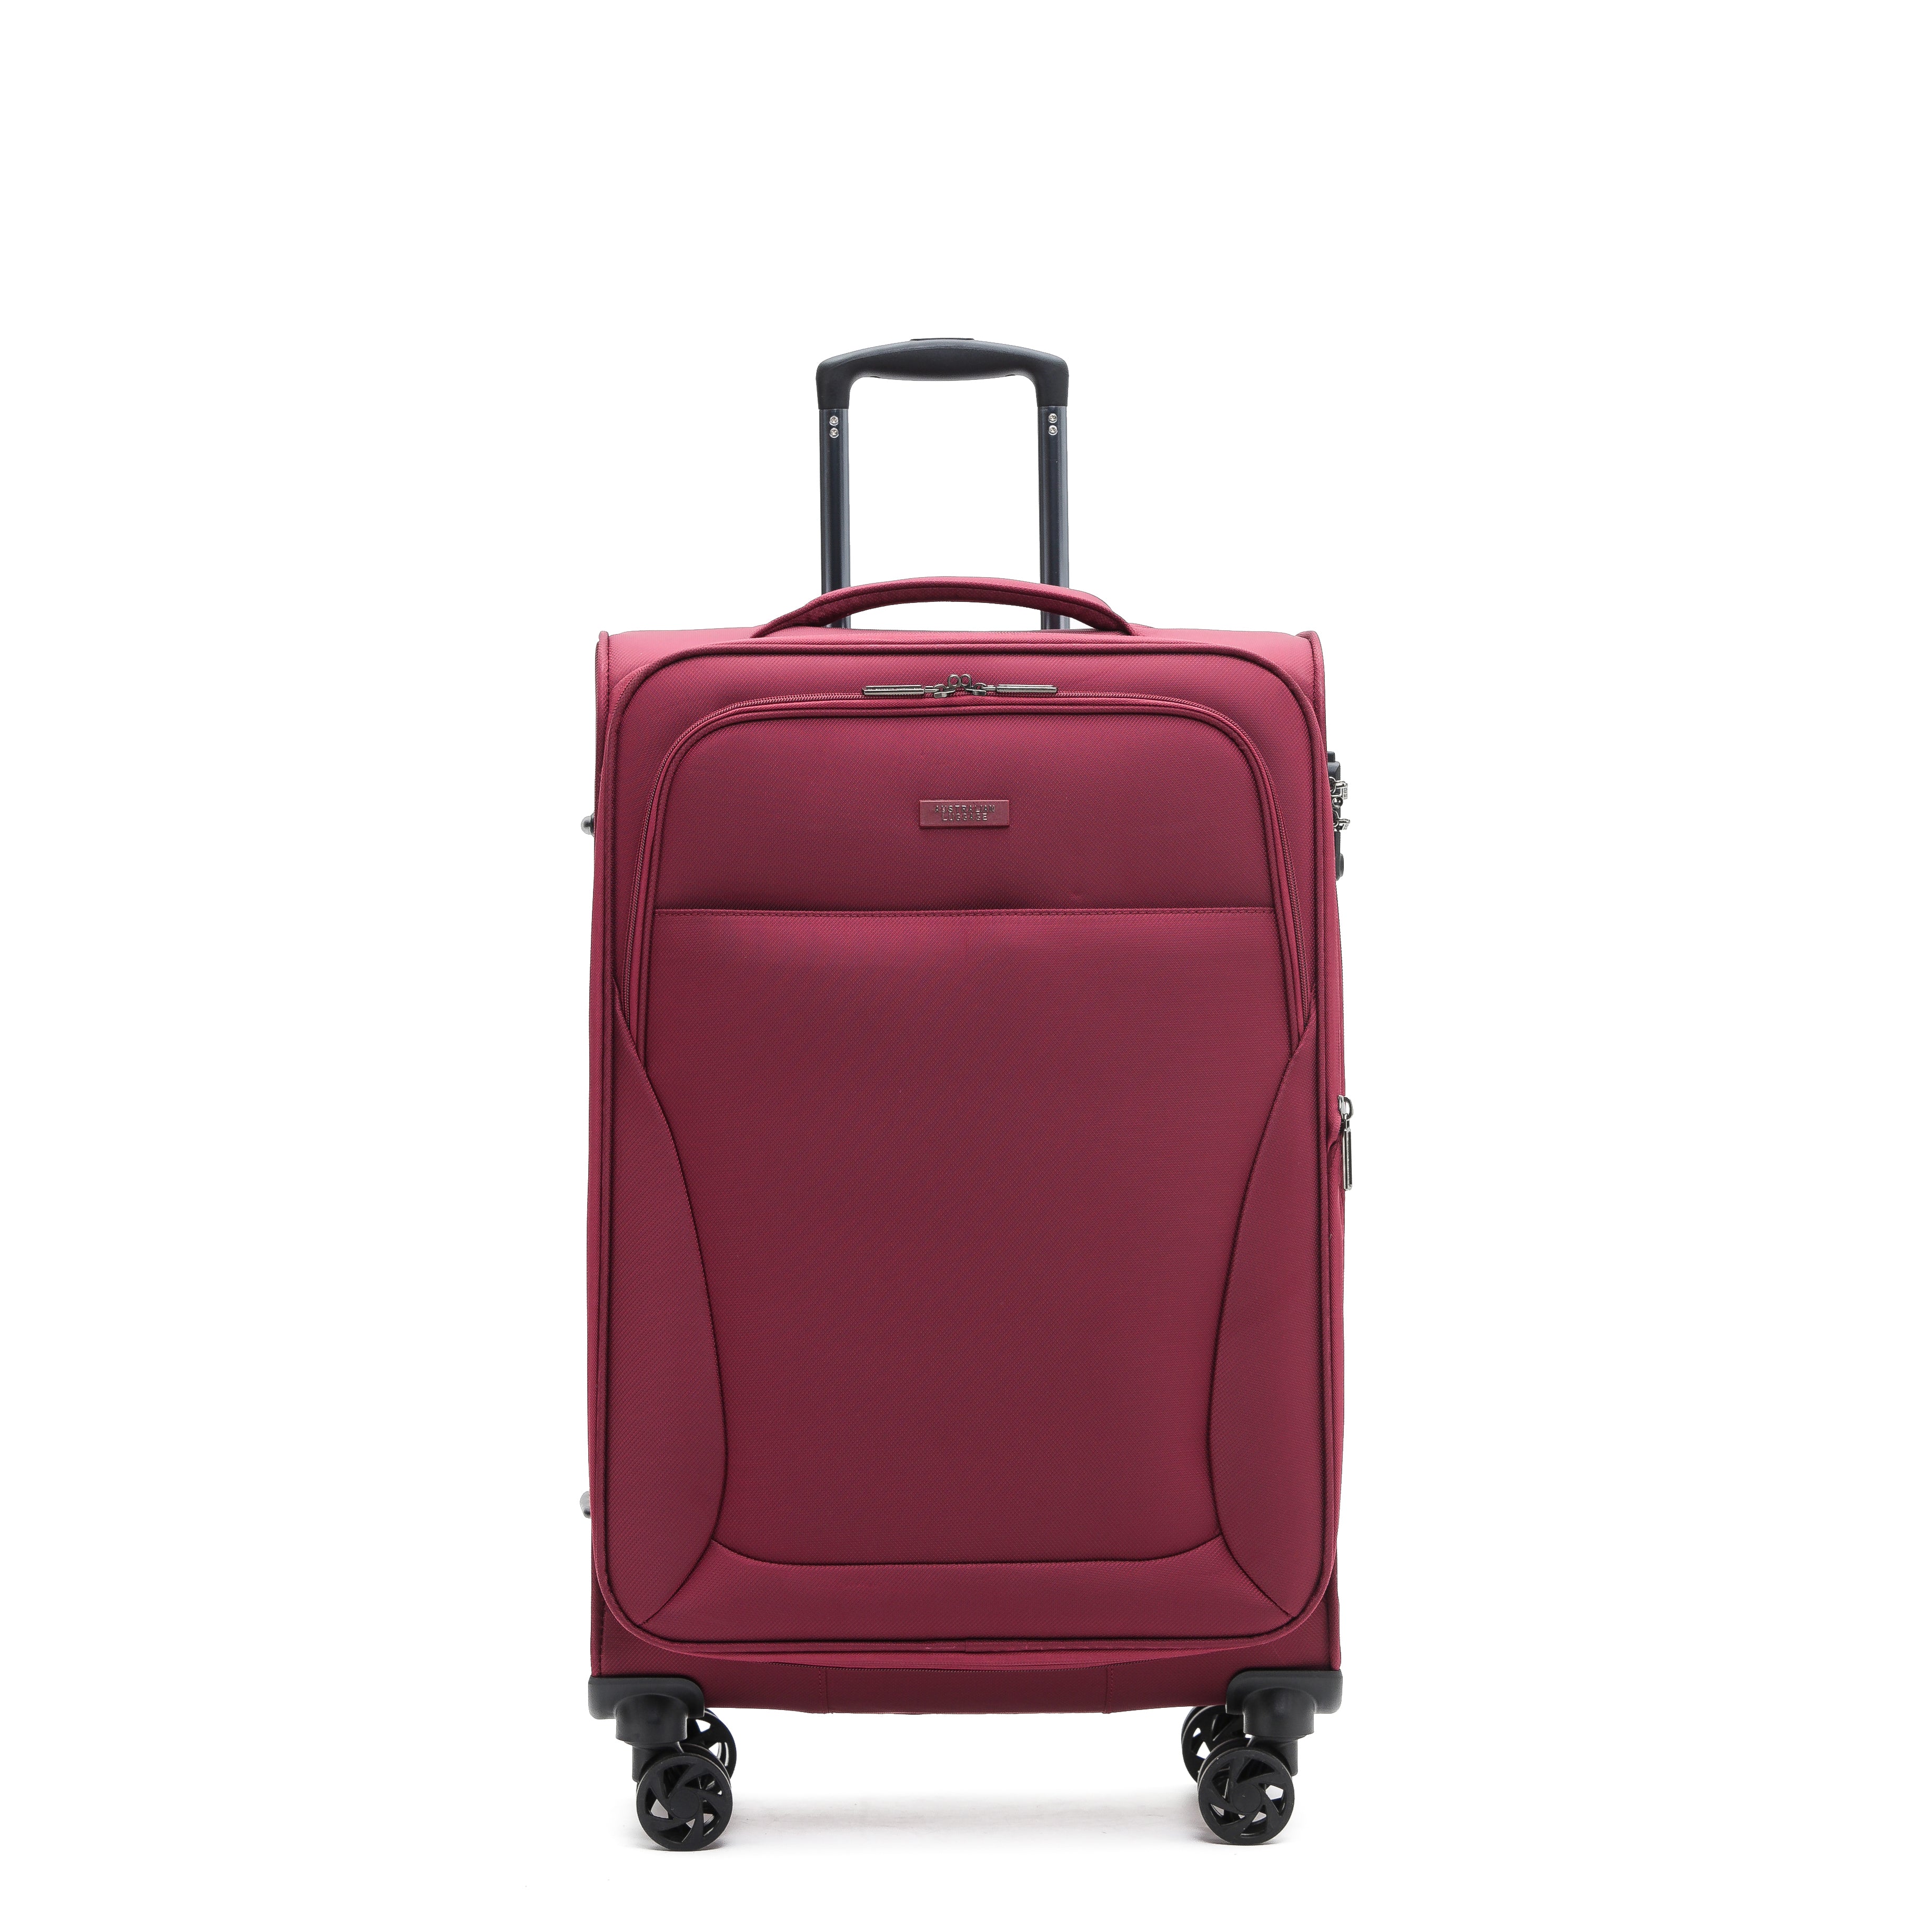 AUS LUGGAGE - WINGS Trolley Case 29in Large - Wine-1